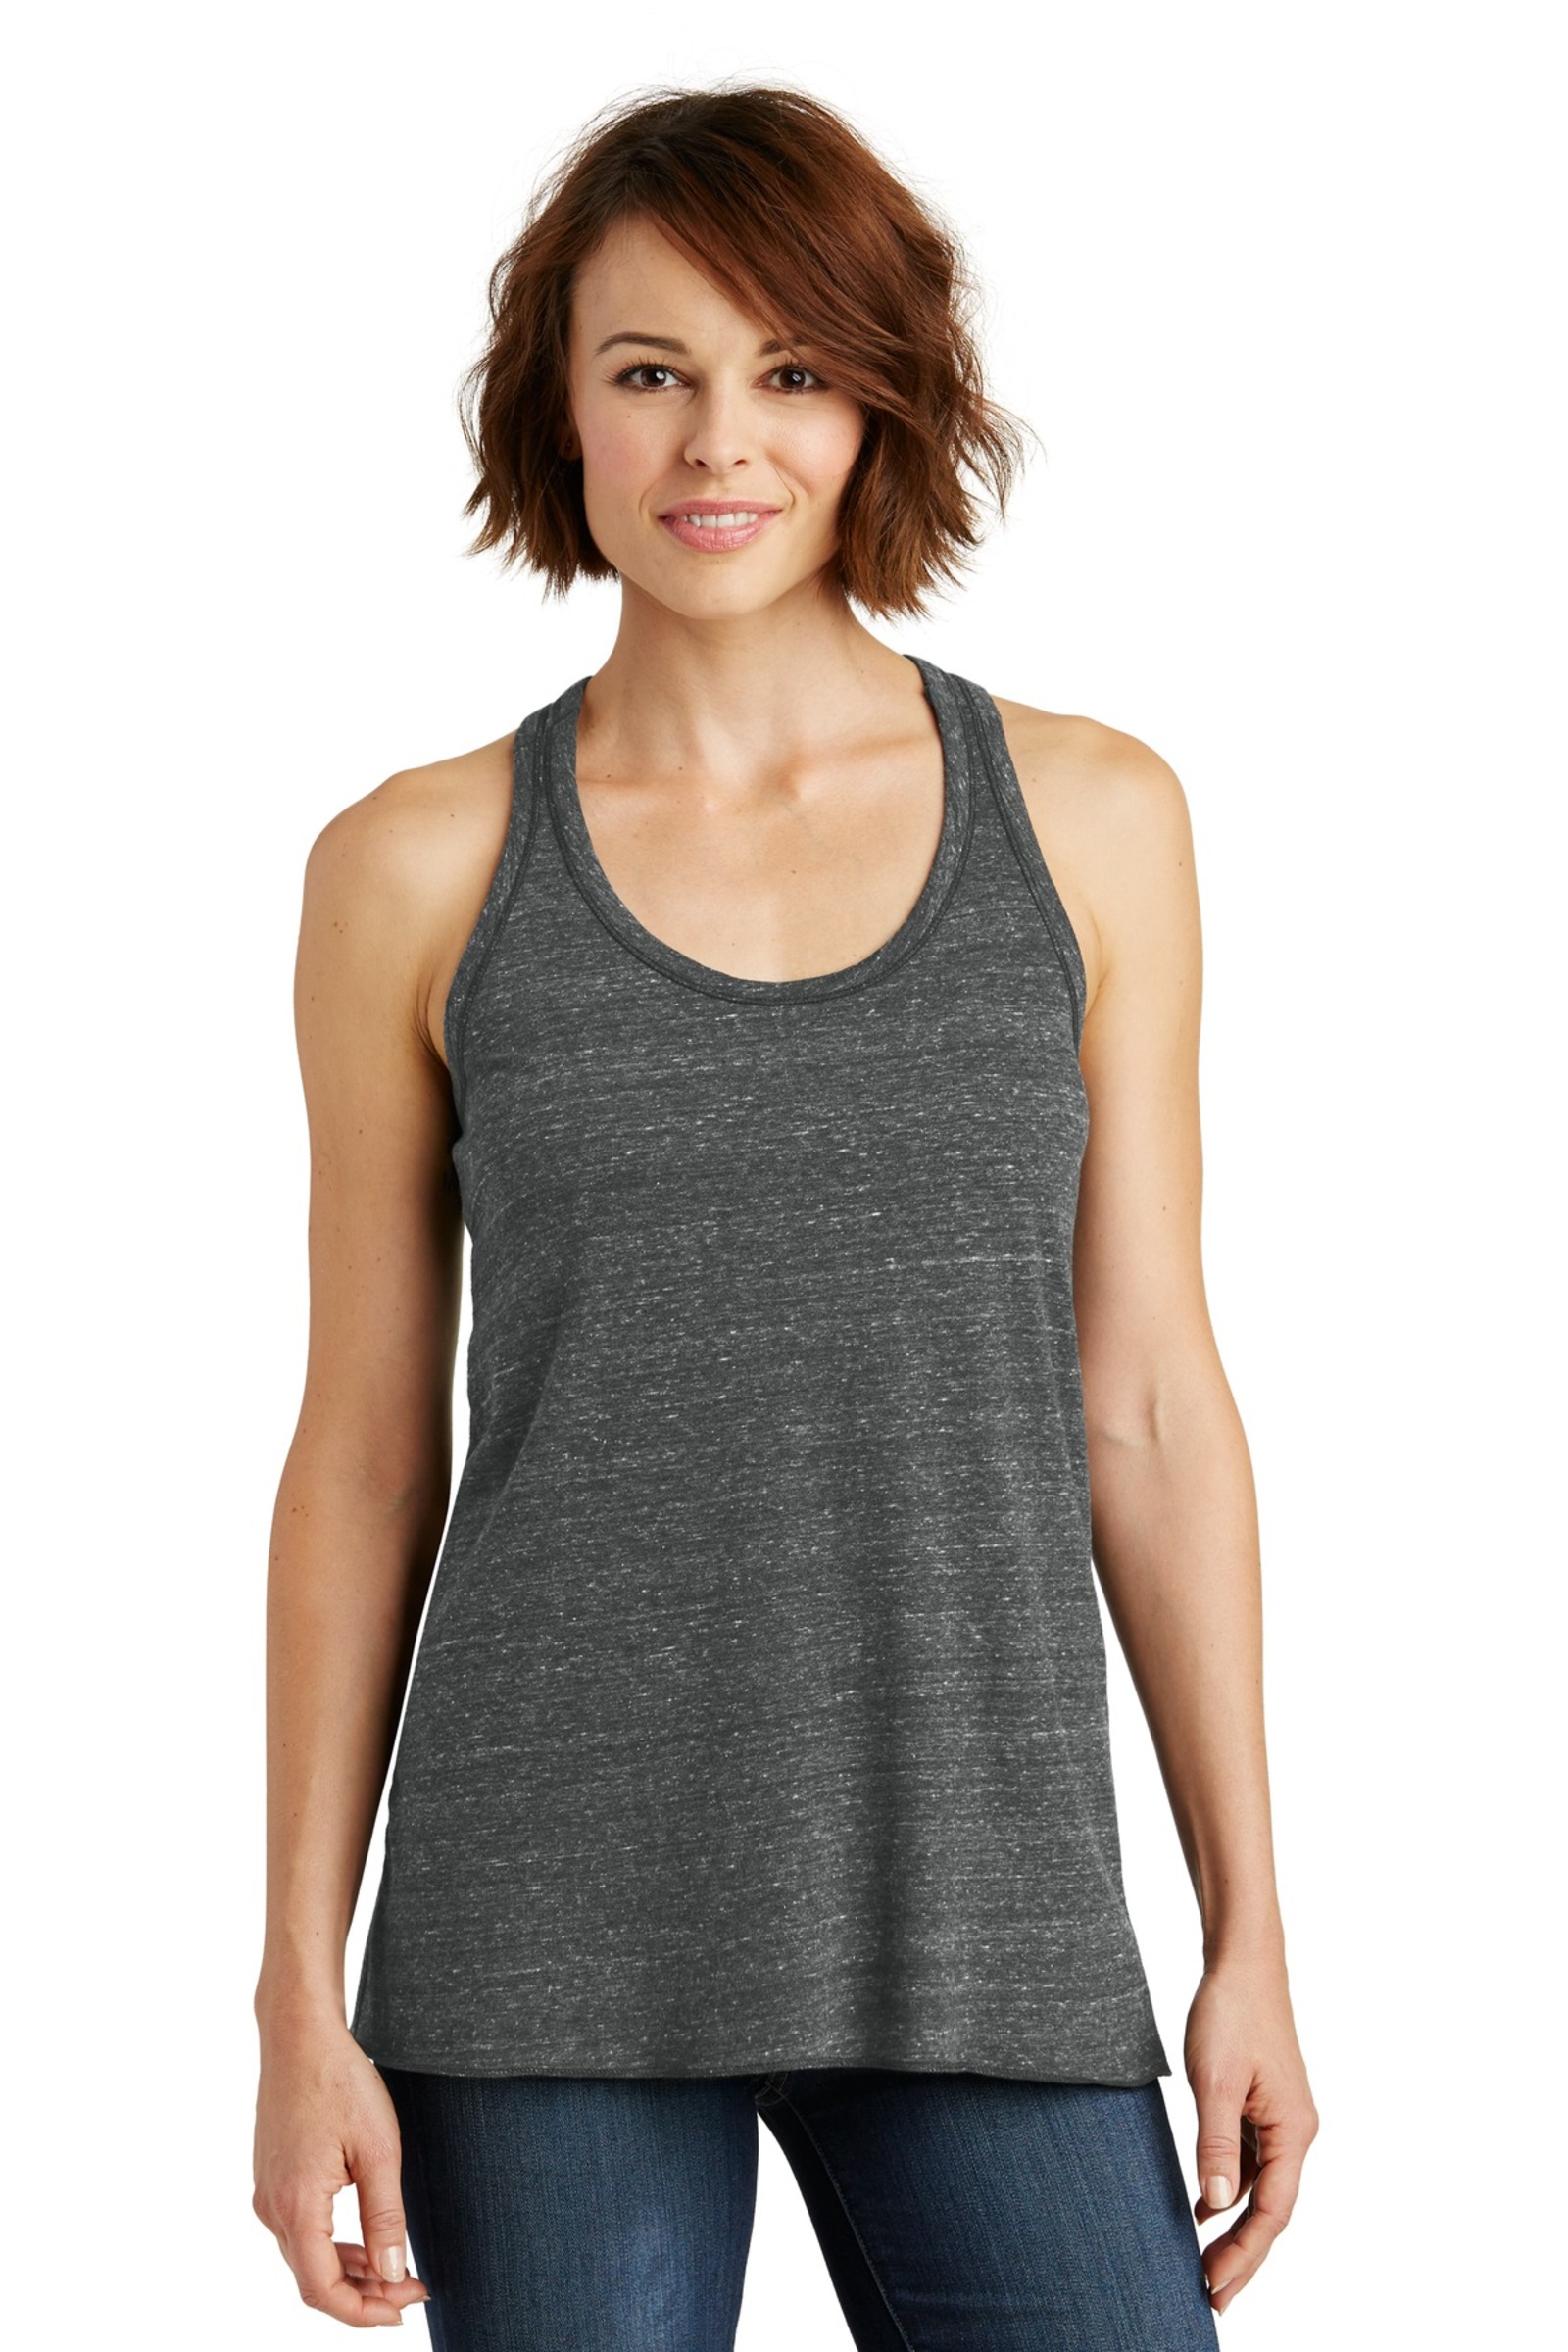 District Embroidered Women's Cosmic Twist Back Tank